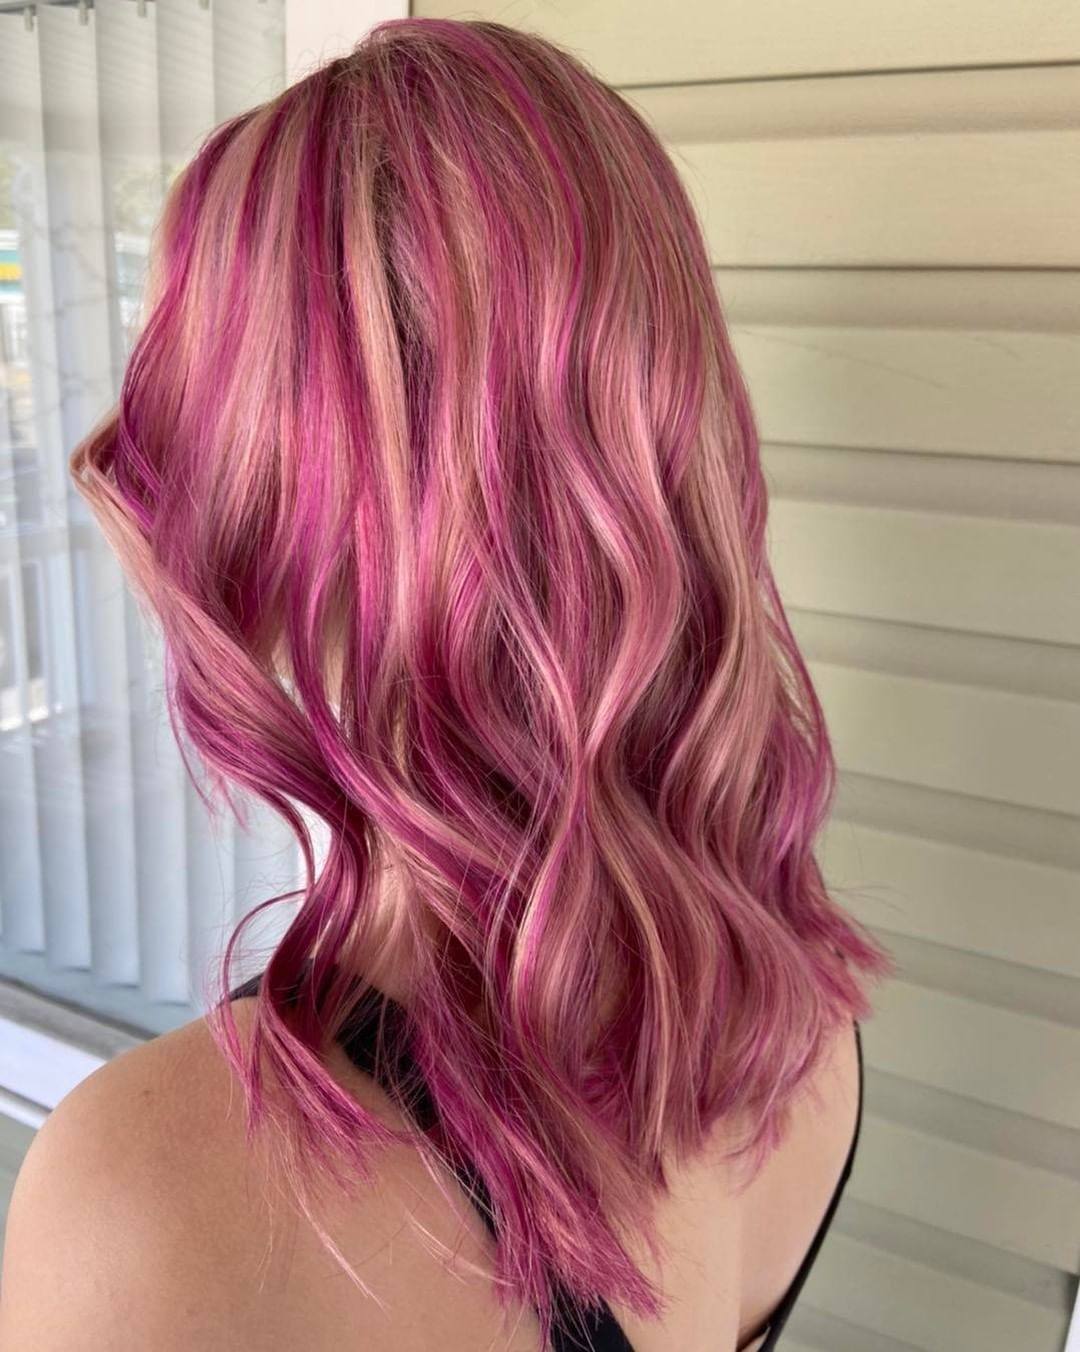 blonde hair with hot pink highlights